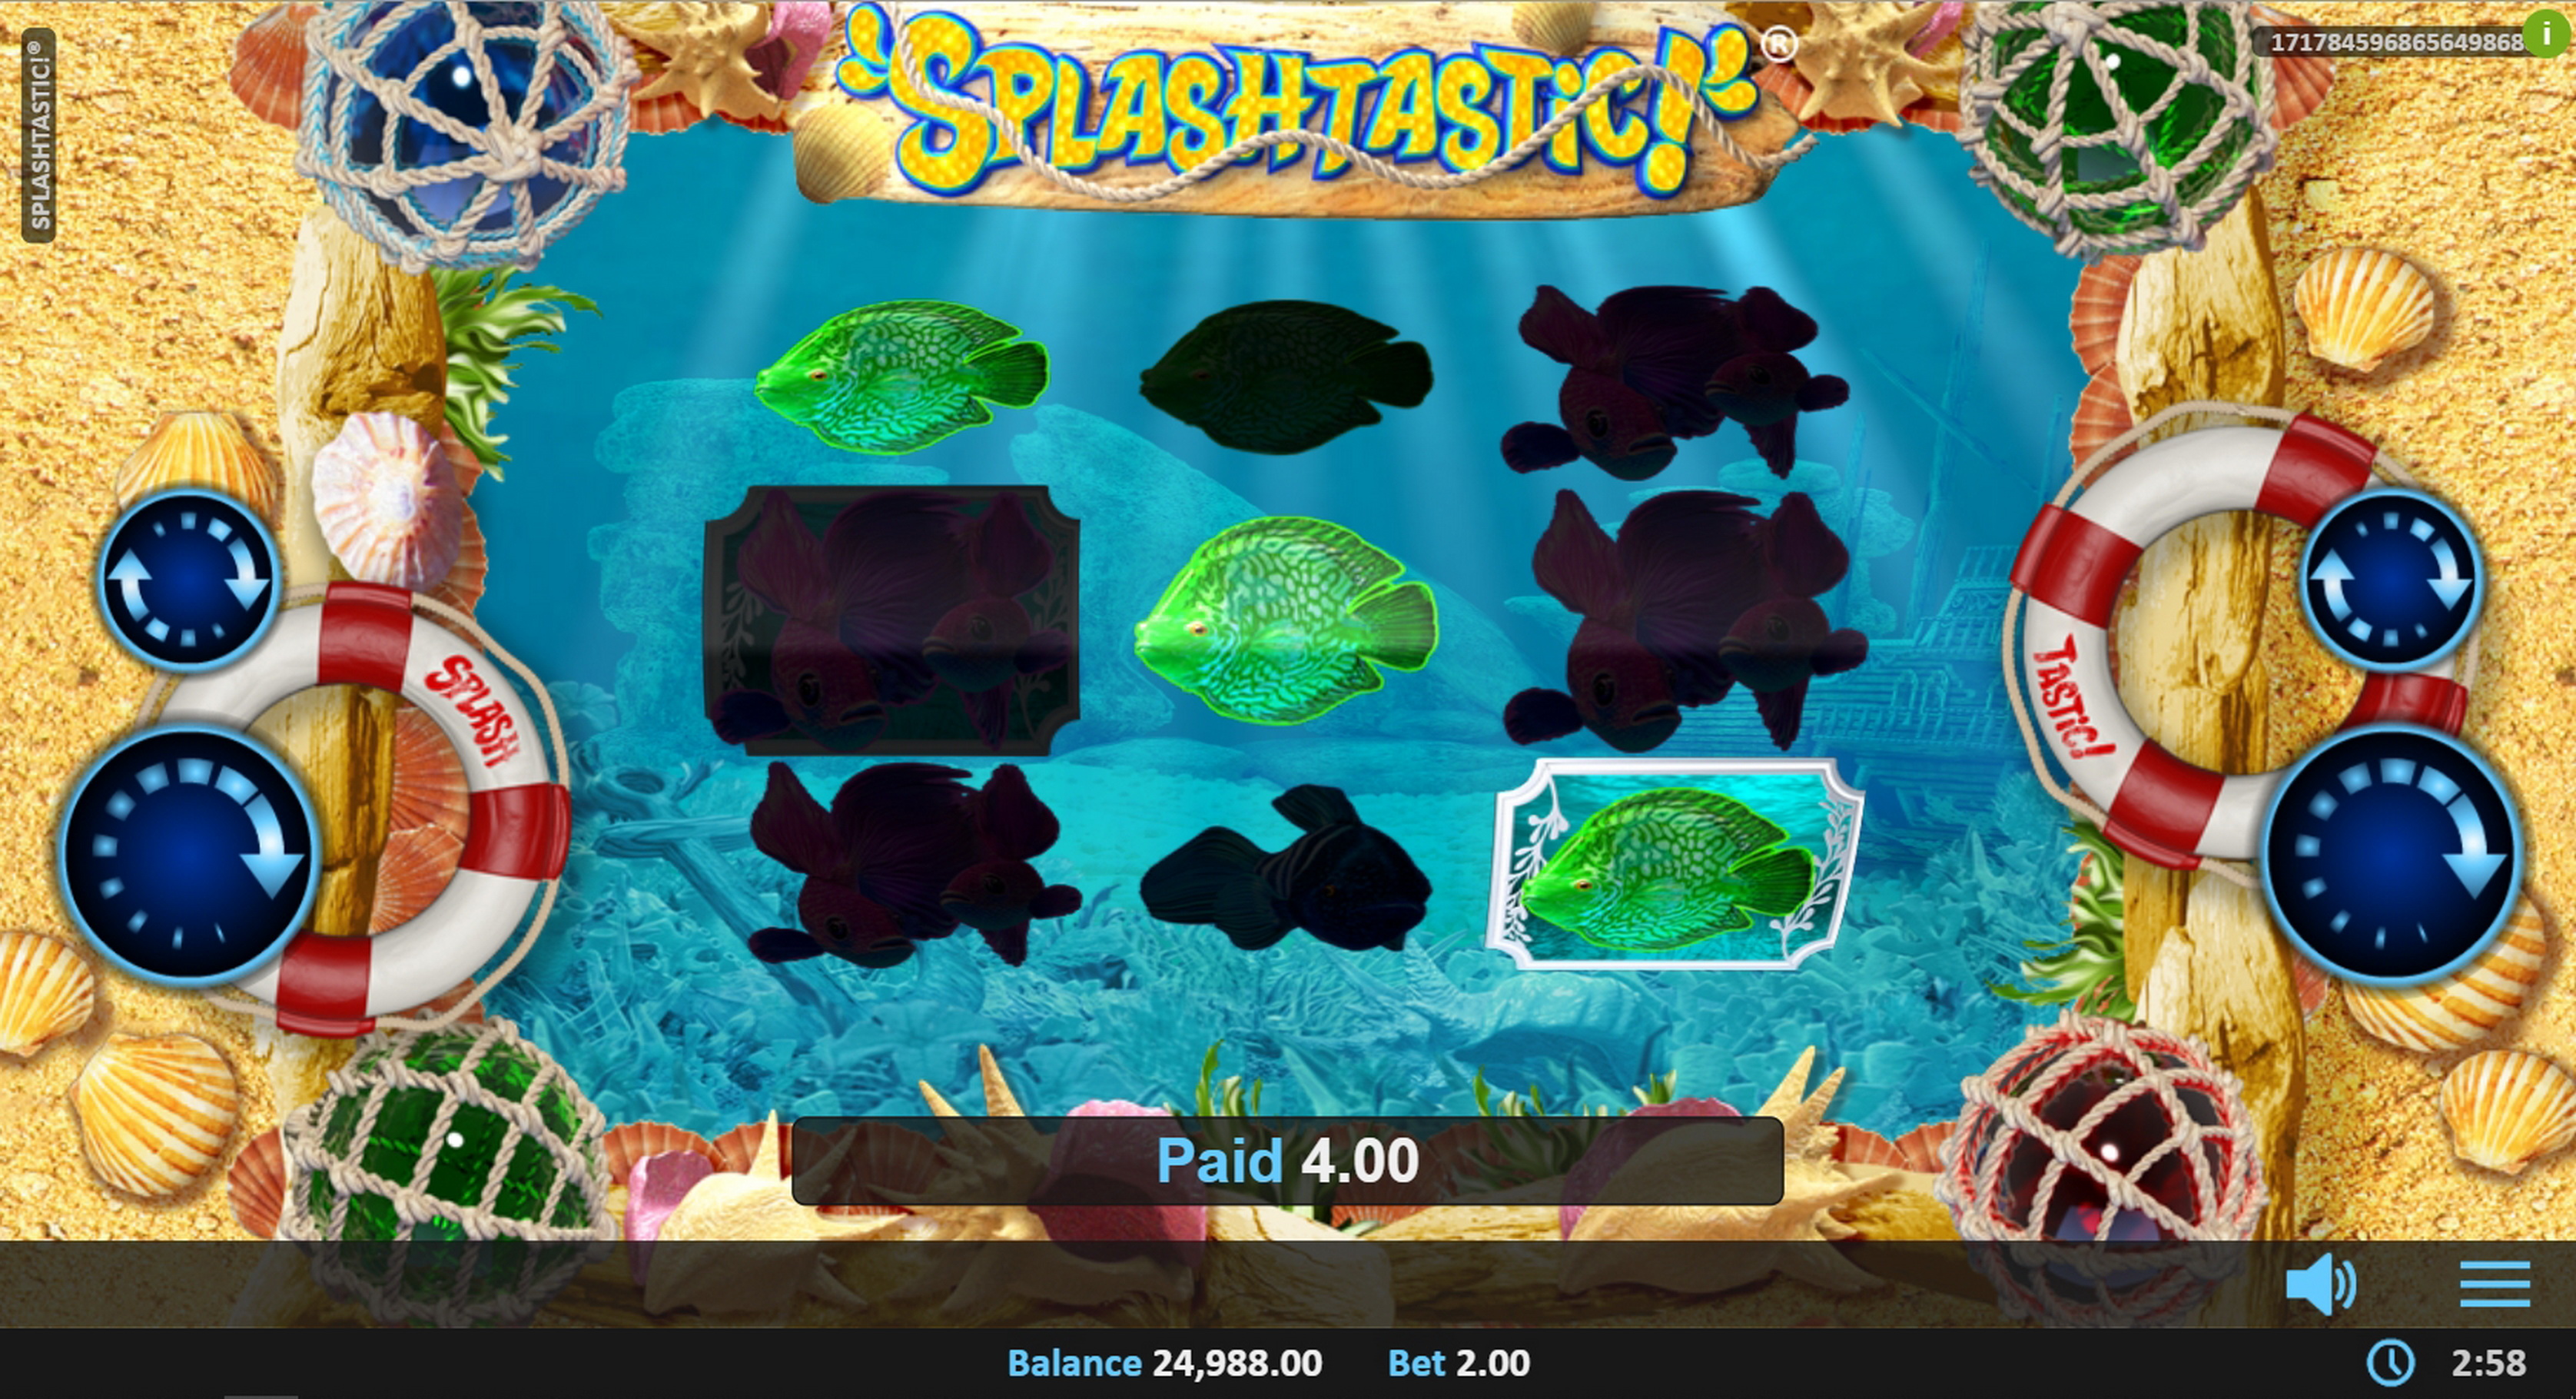 Win Money in Splashtastic Free Slot Game by Realistic Games